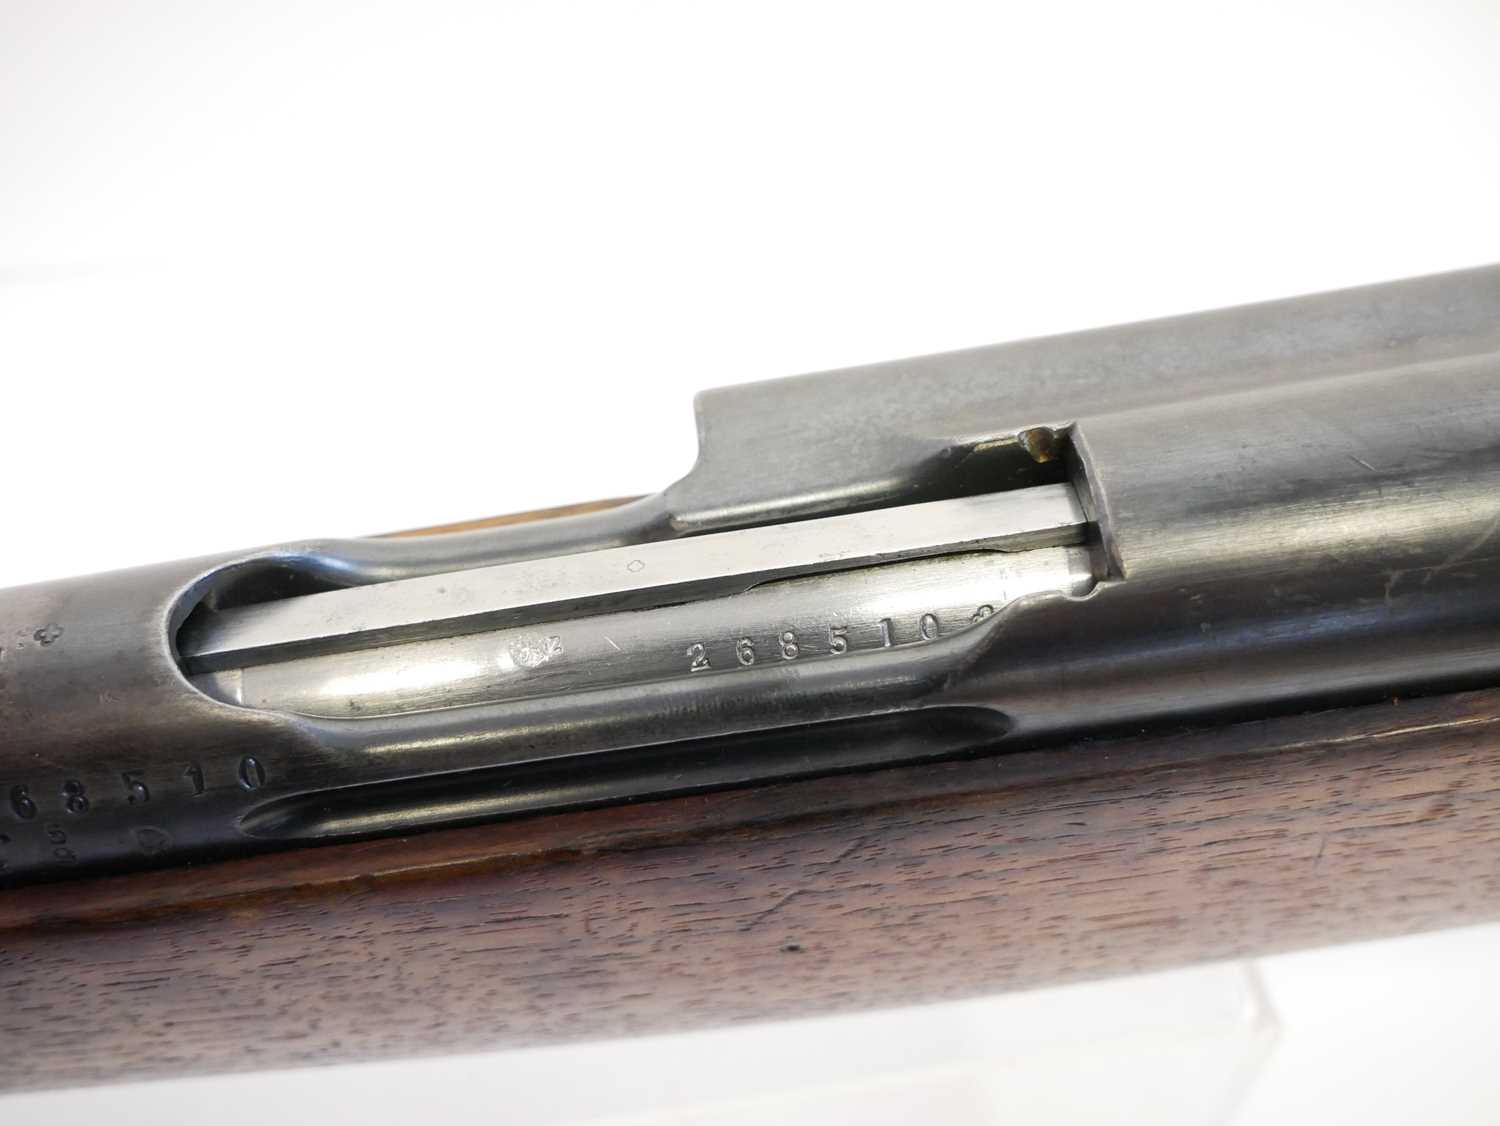 Schmidt Rubin 1896 7.5mm straight pull rifle, matching serial numbers 268510 to barrel, receiver, - Image 13 of 15